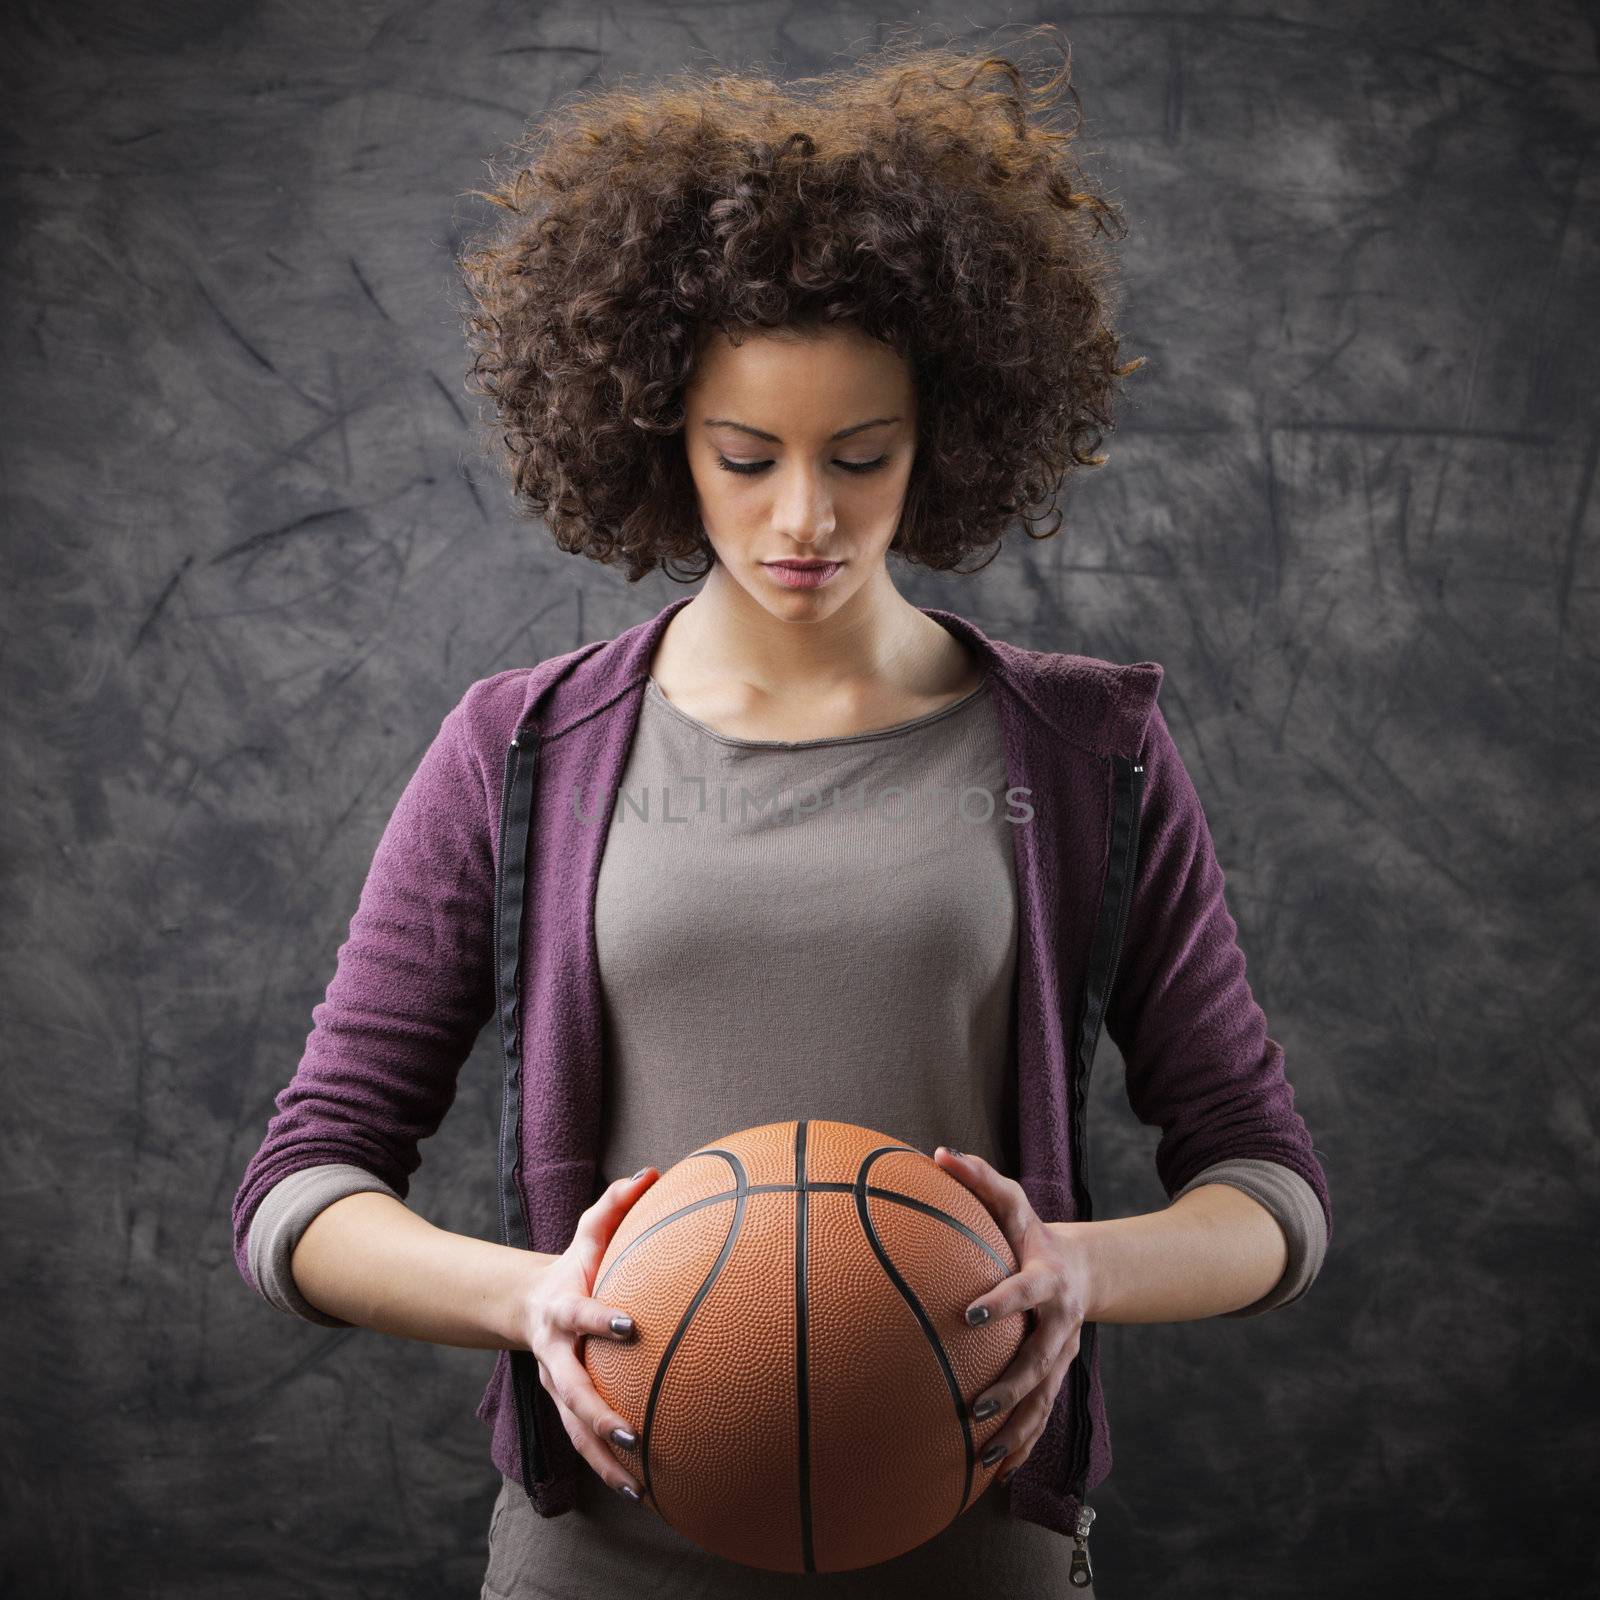 Portrait of young beautiful woman holding a basketball